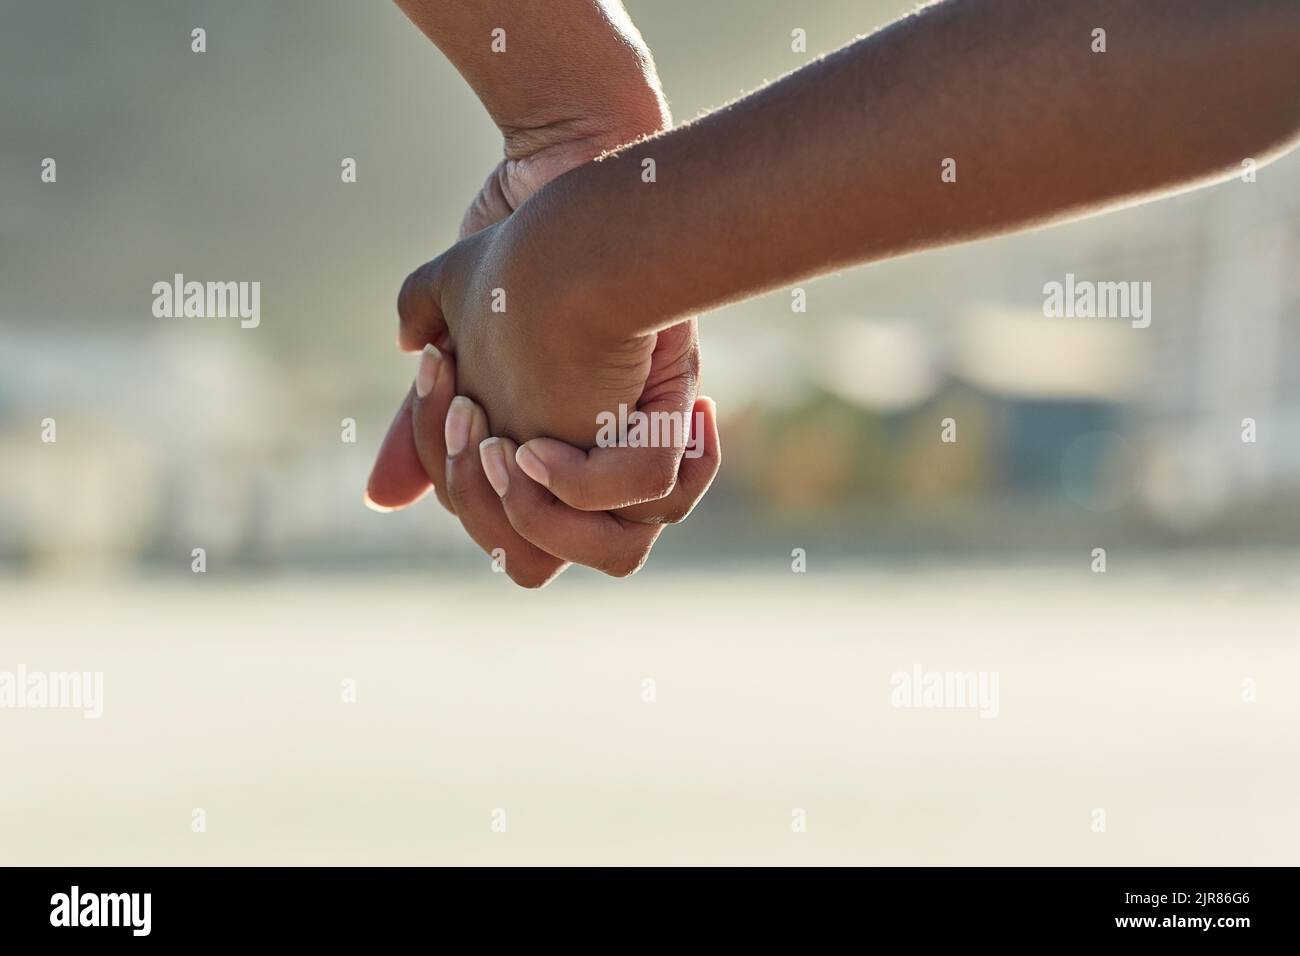 Hand in hand. Closeup shot of an adult holding a childs hand outside. Stock Photo